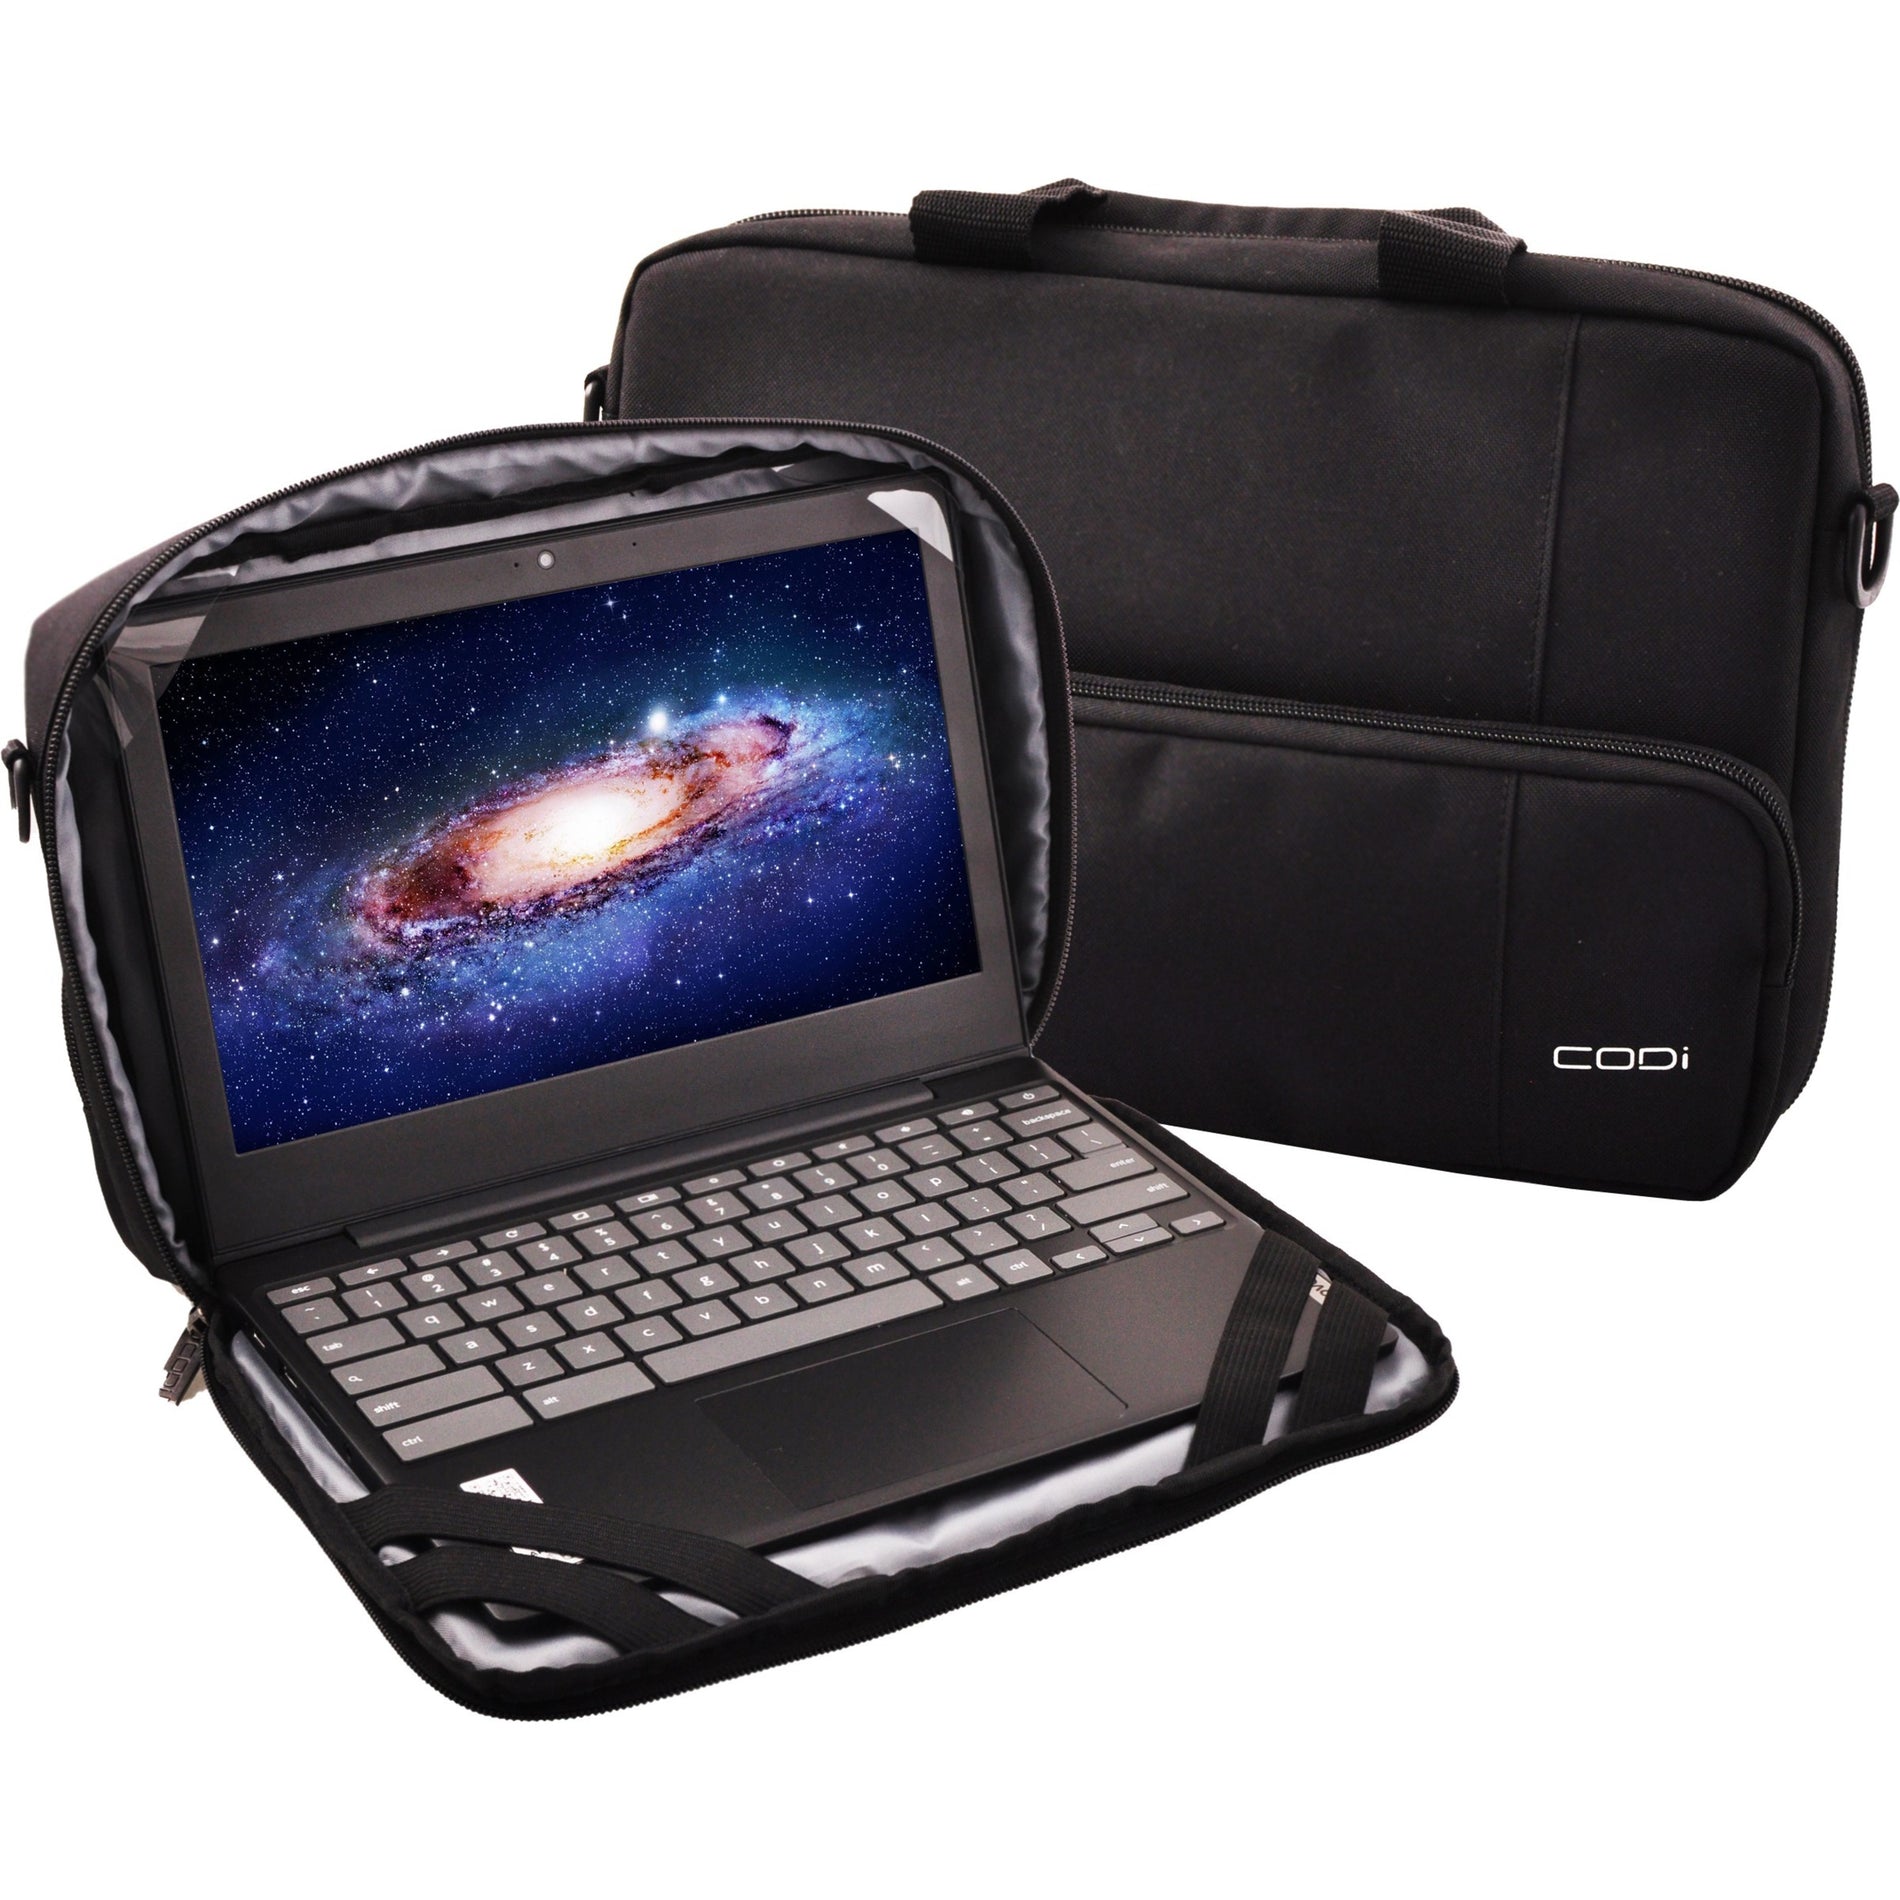 CODi AWO116-4 Alunno Always-On 11.6" Chromebook Case, Durable and Water-Resistant, Black